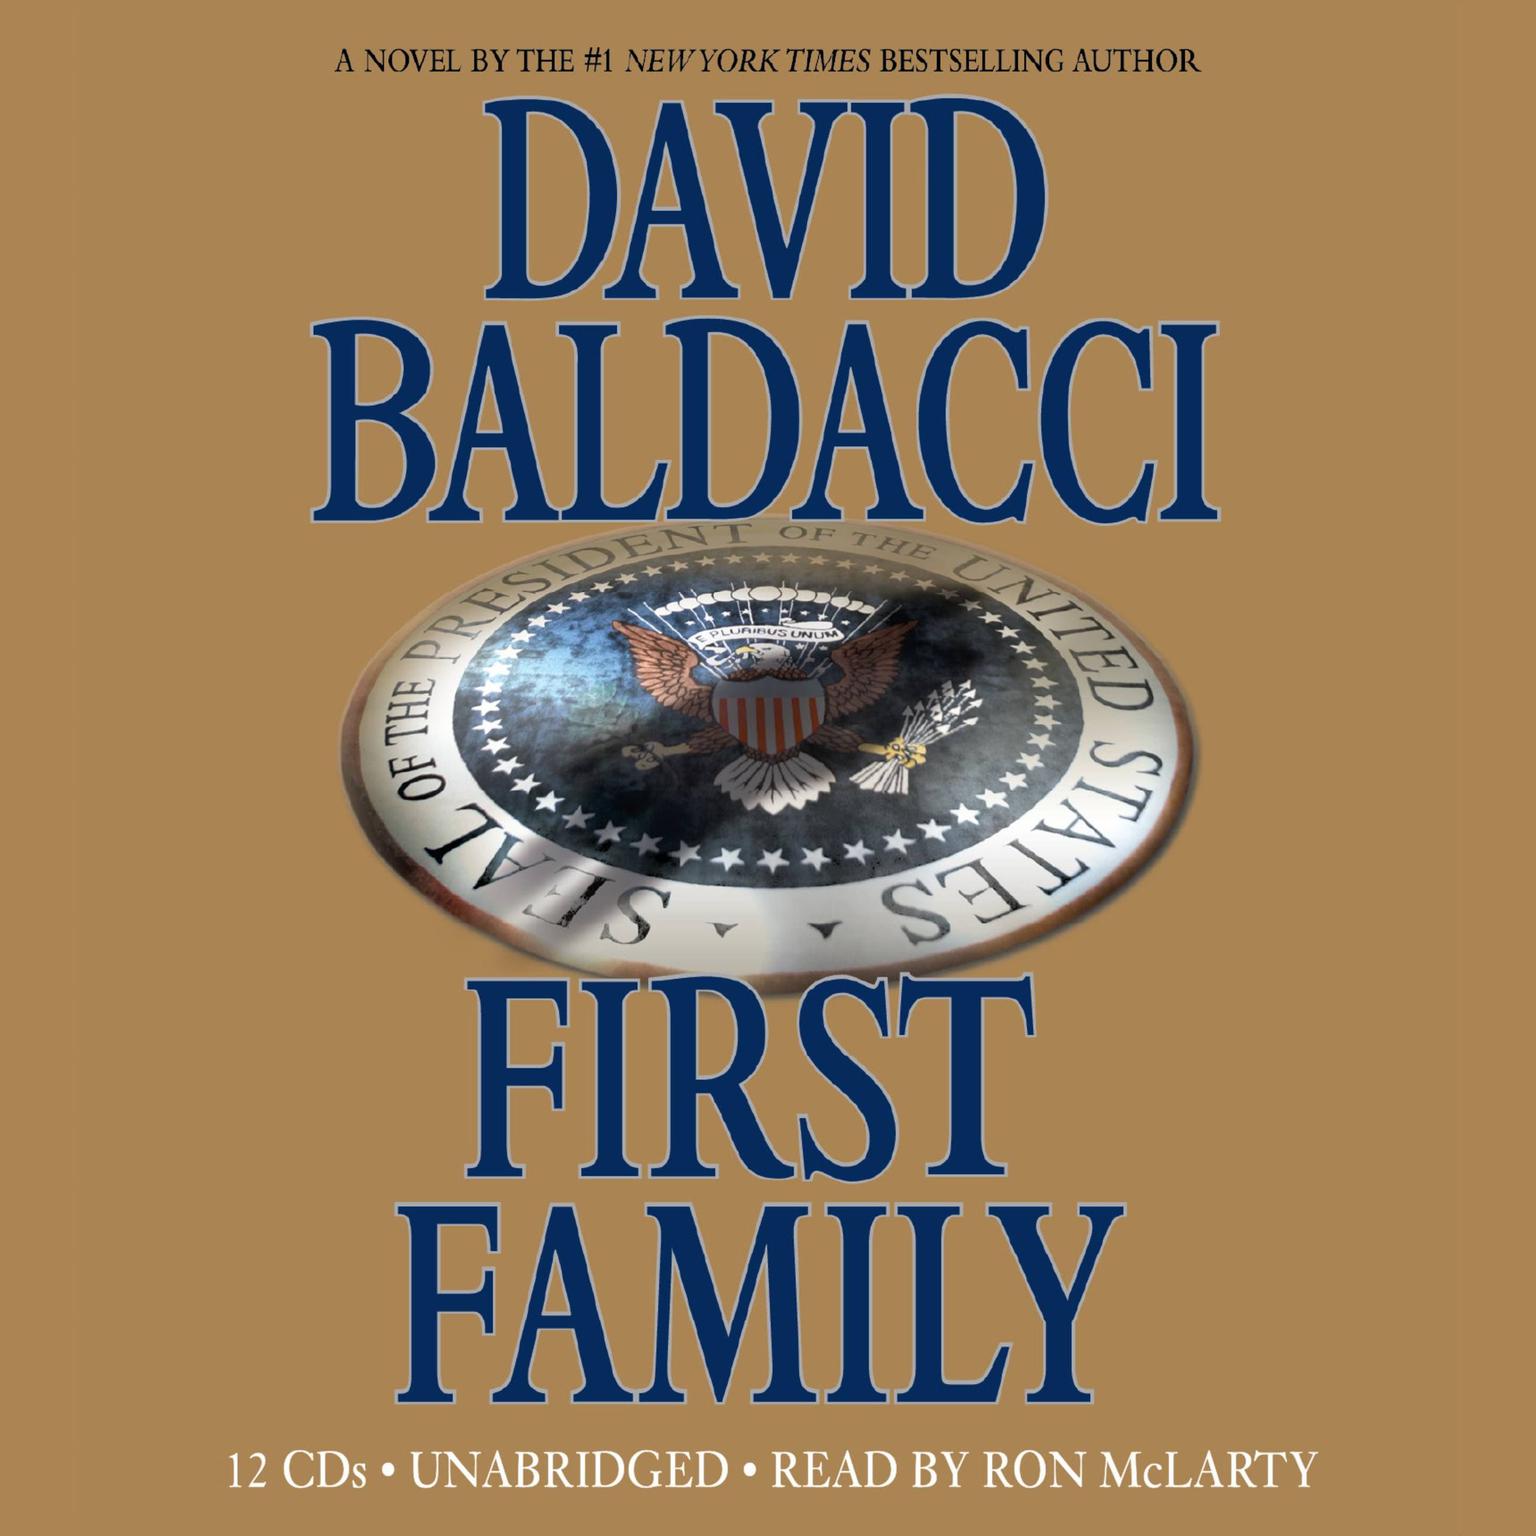 First Family Audiobook, by David Baldacci